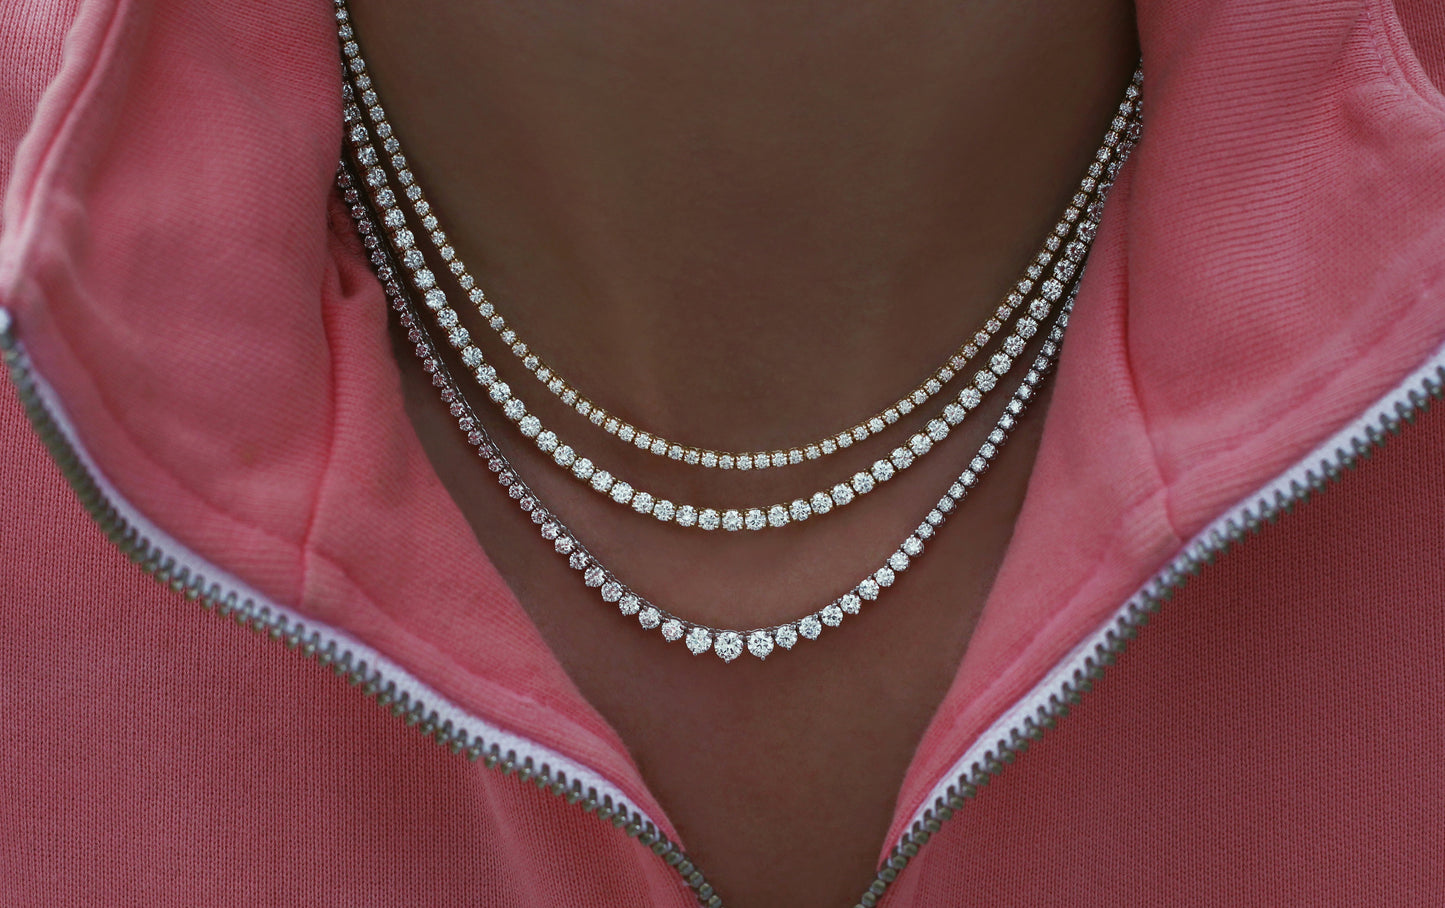 14kt gold and diamond classic tennis necklace